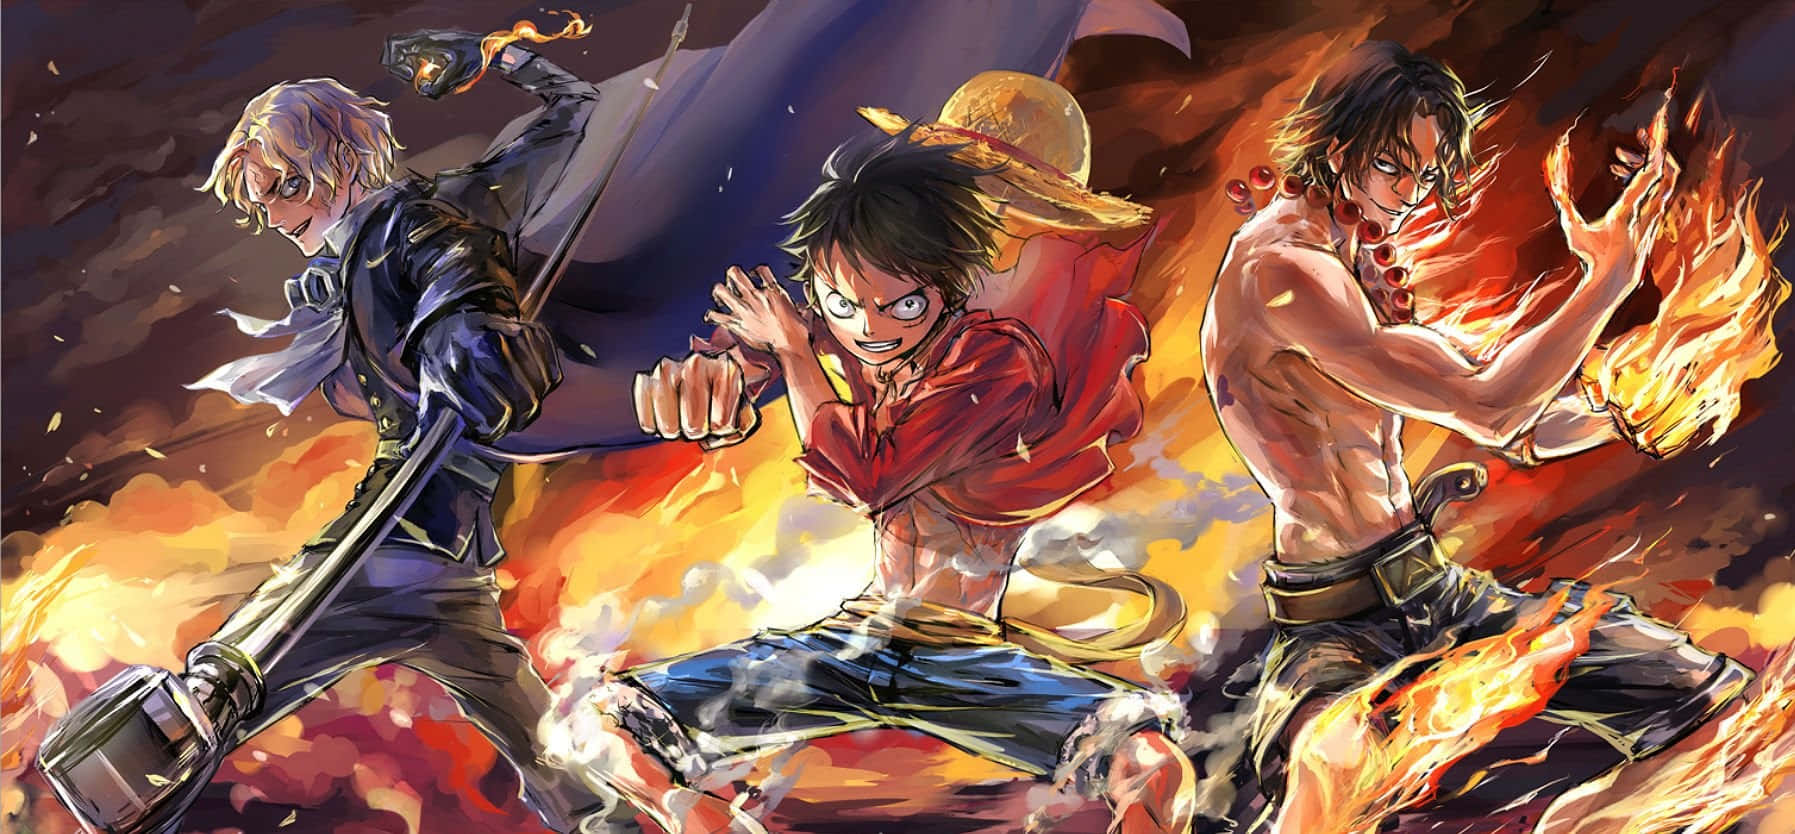 Google Anime Flaming One Piece Wallpaper